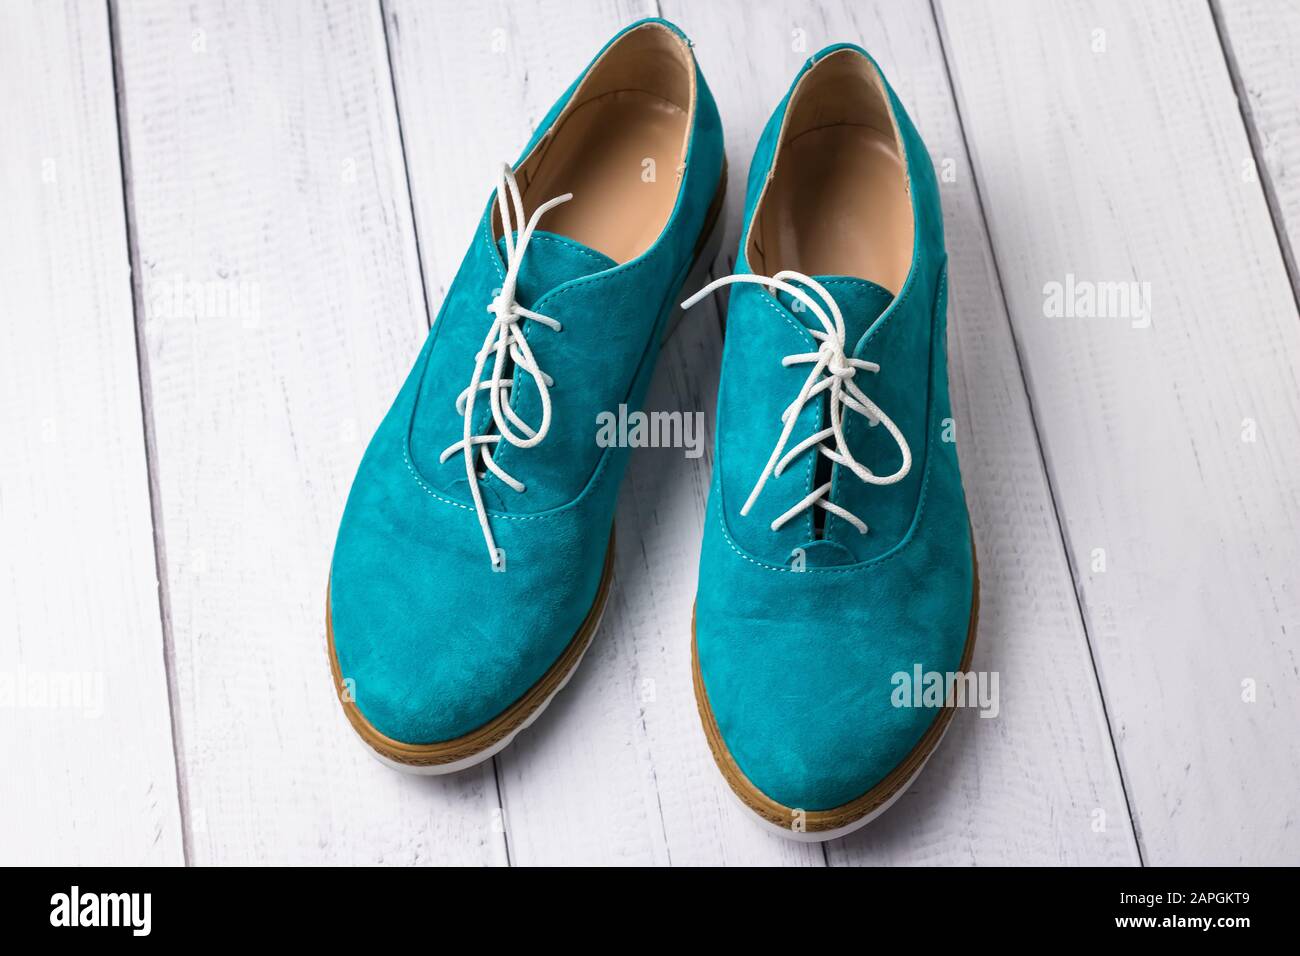 Pair of green casual suede shoes with laces on wooden background. Turquoise women's oxfords, oxford shoe Stock Photo